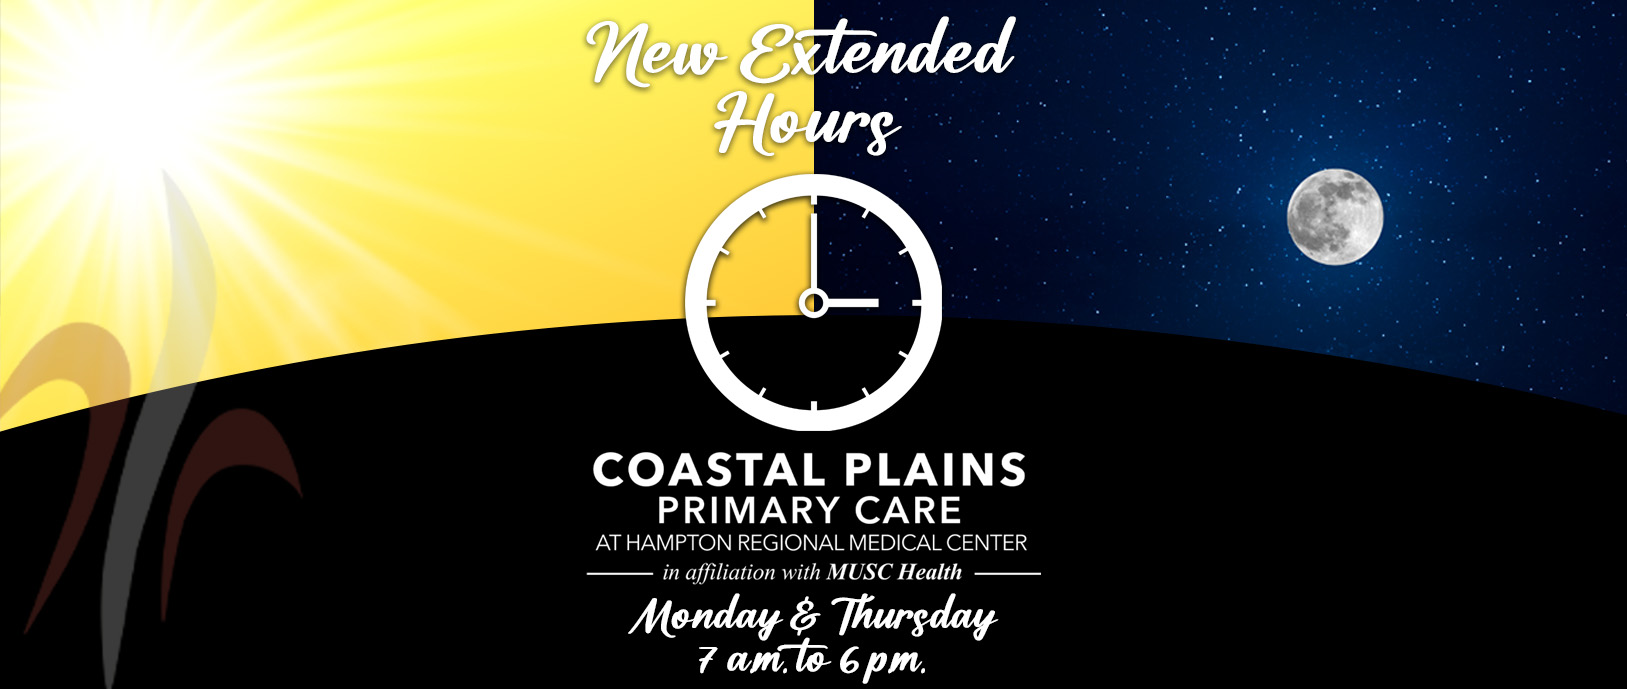 Banner picture of a sun and moon with a outline of a clock drawn between both of them. Banner says:

New Extended Hours
COASTAL PLAINS PRIMARY CARE
AT HAMPTON REGIONAL MEDICAL CENTER
-in affiliation with -MUSC Health-
Monday & THURSDAY
7 AM to 6 pm.